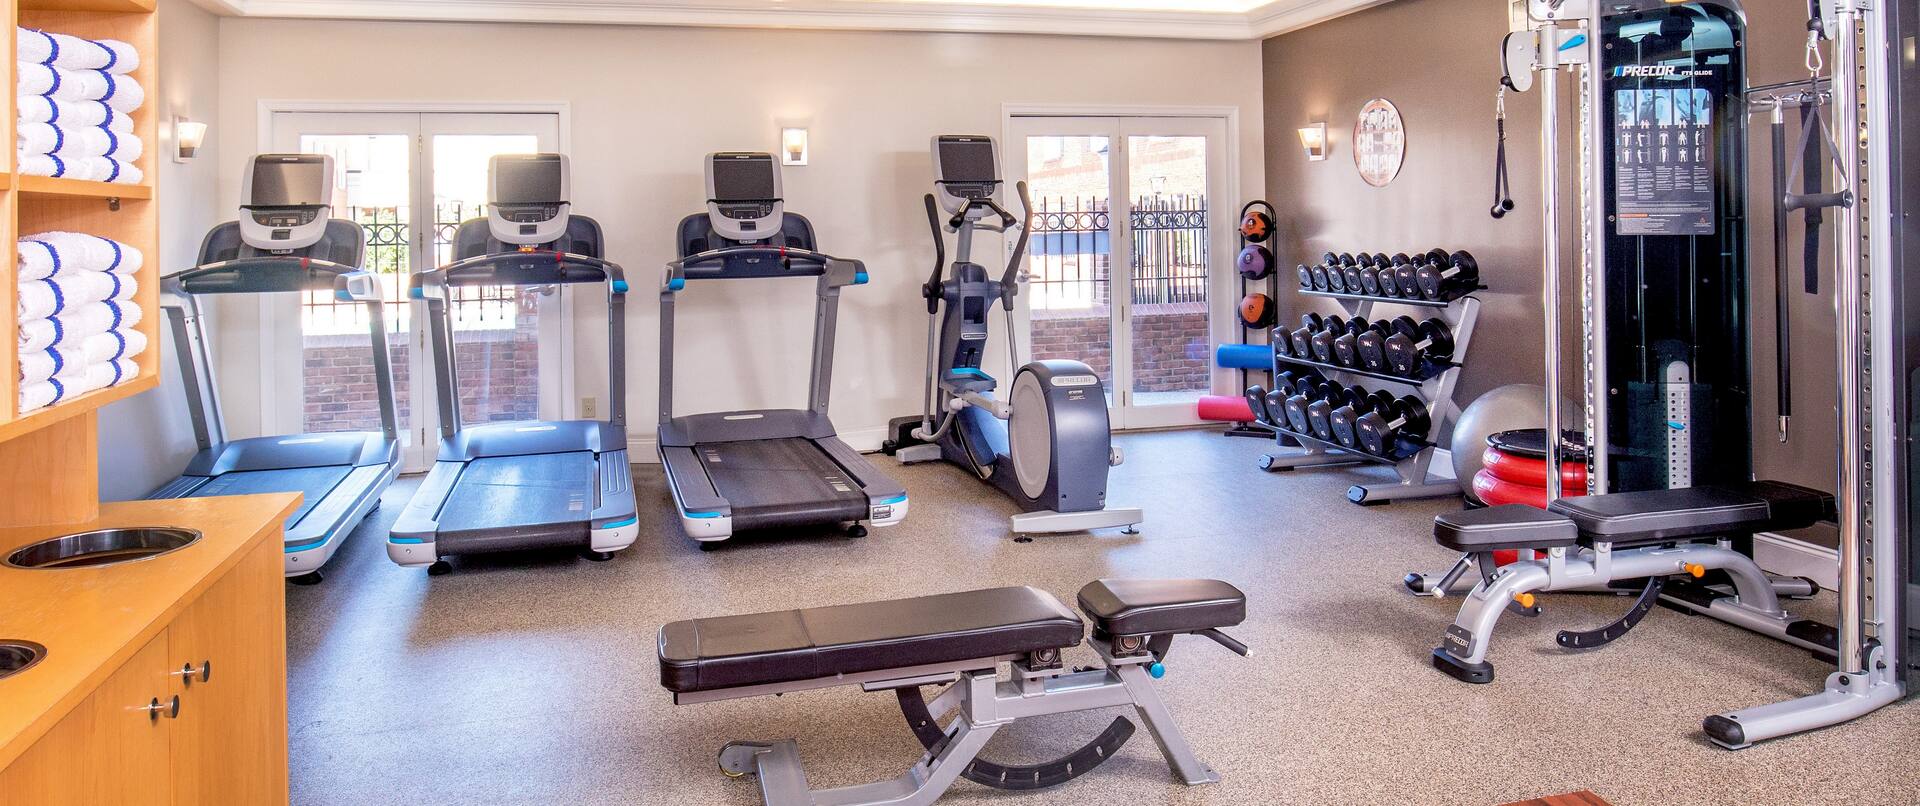 Fitness Center With Towel Station, Cardio Equipment, Weight Balls, Free Weights, Stability Ball, Aerobic Stepper, Weight Machine, and Bench